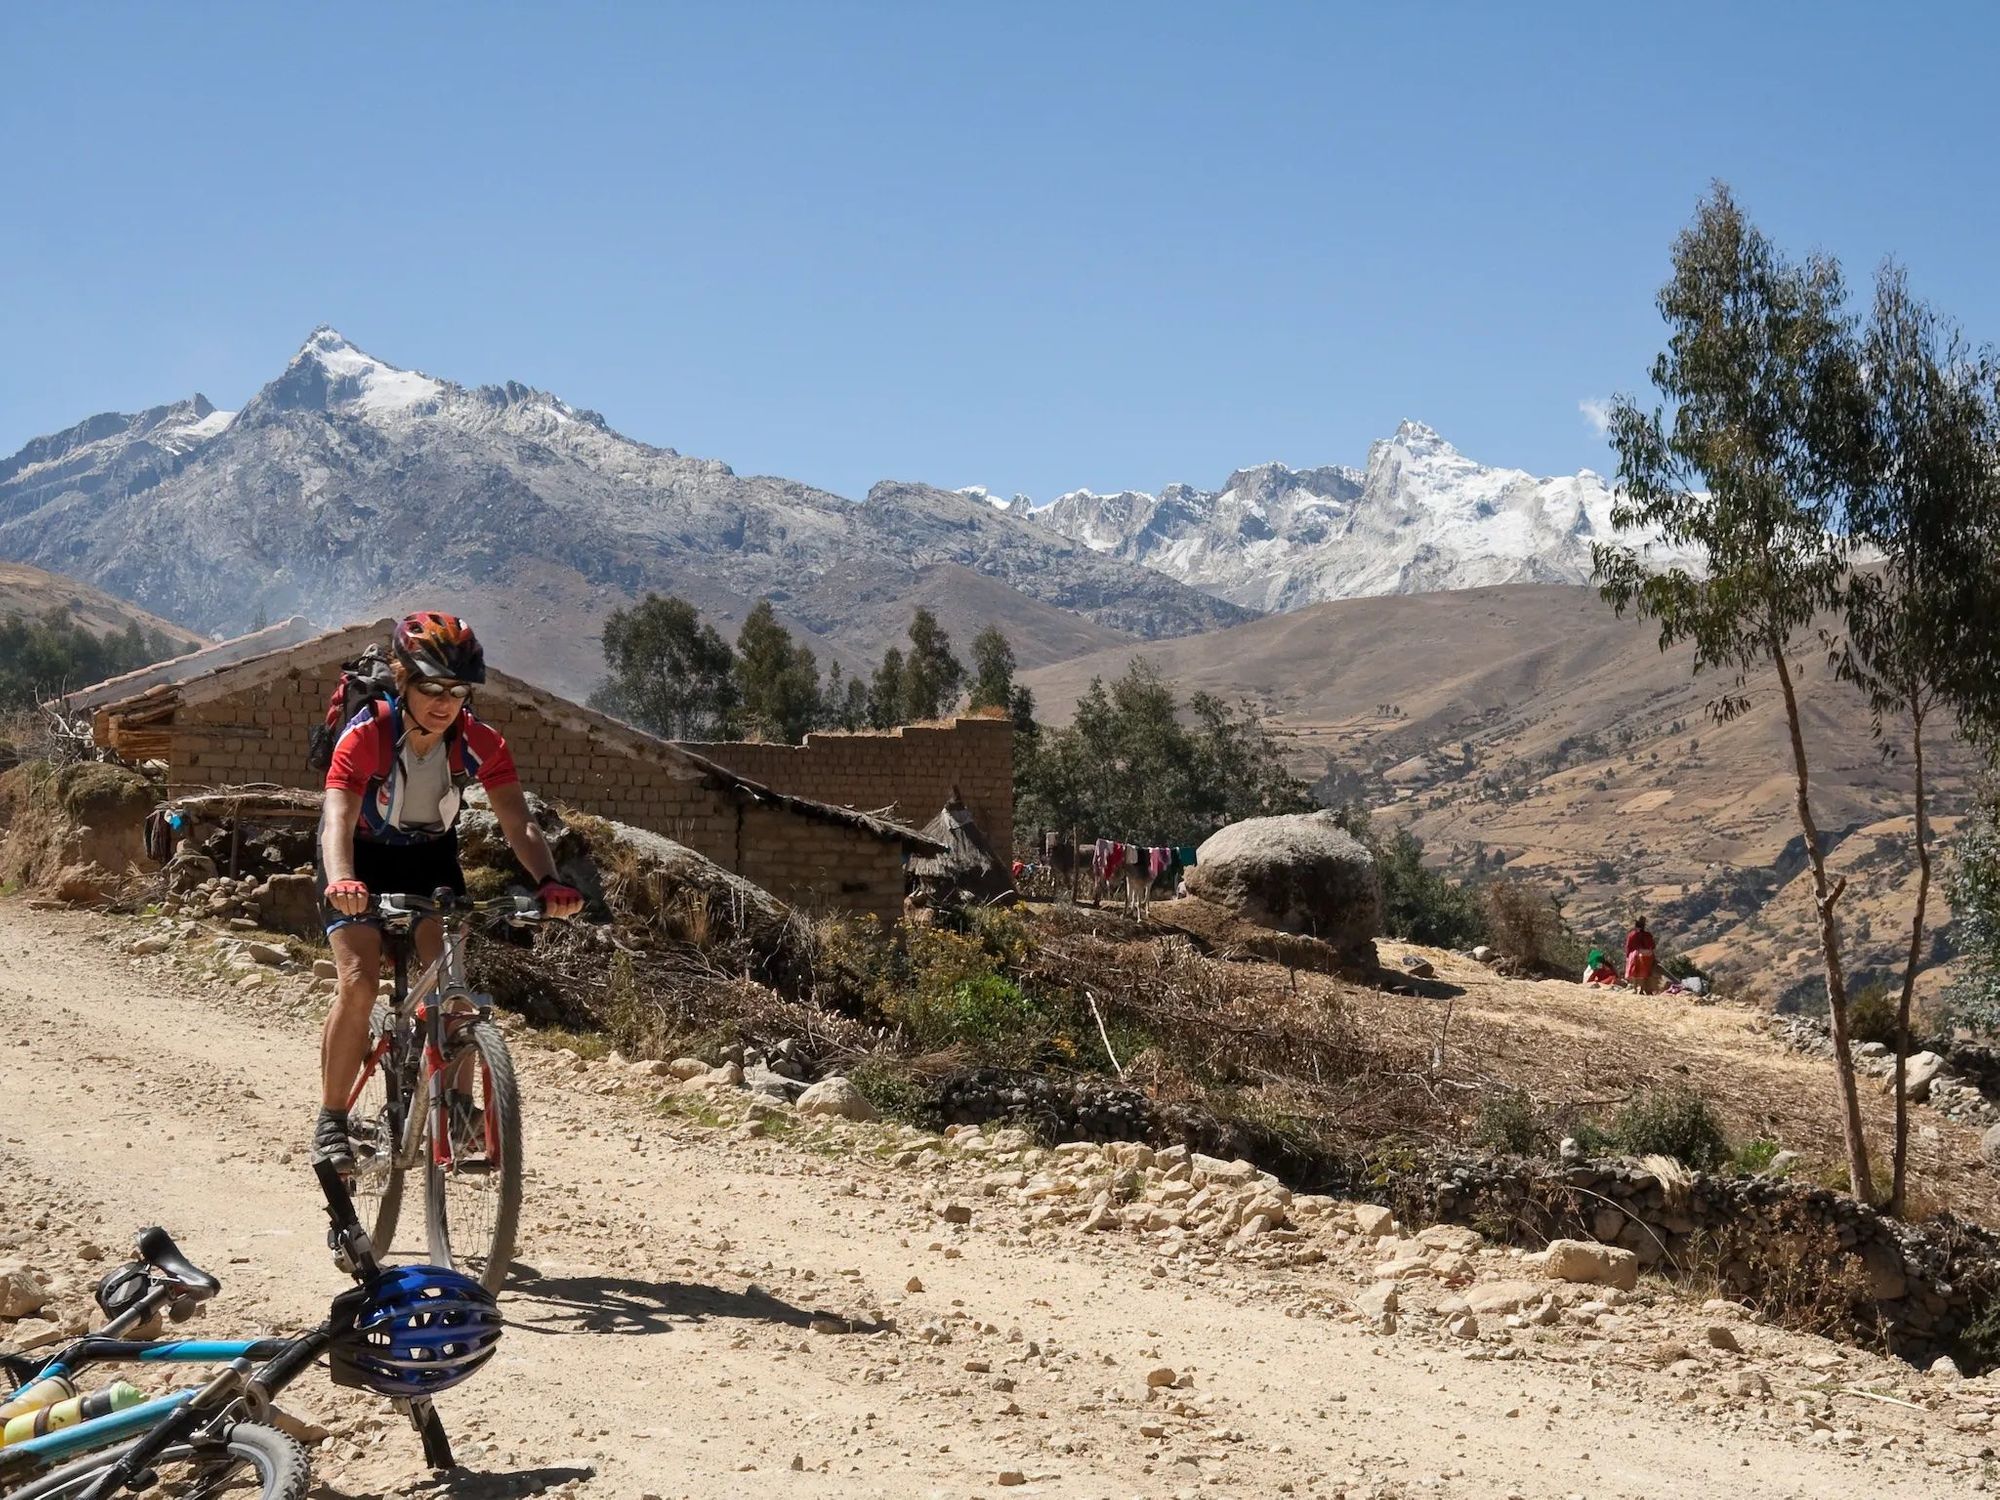 A cyclist on a mountain road in the Andes.